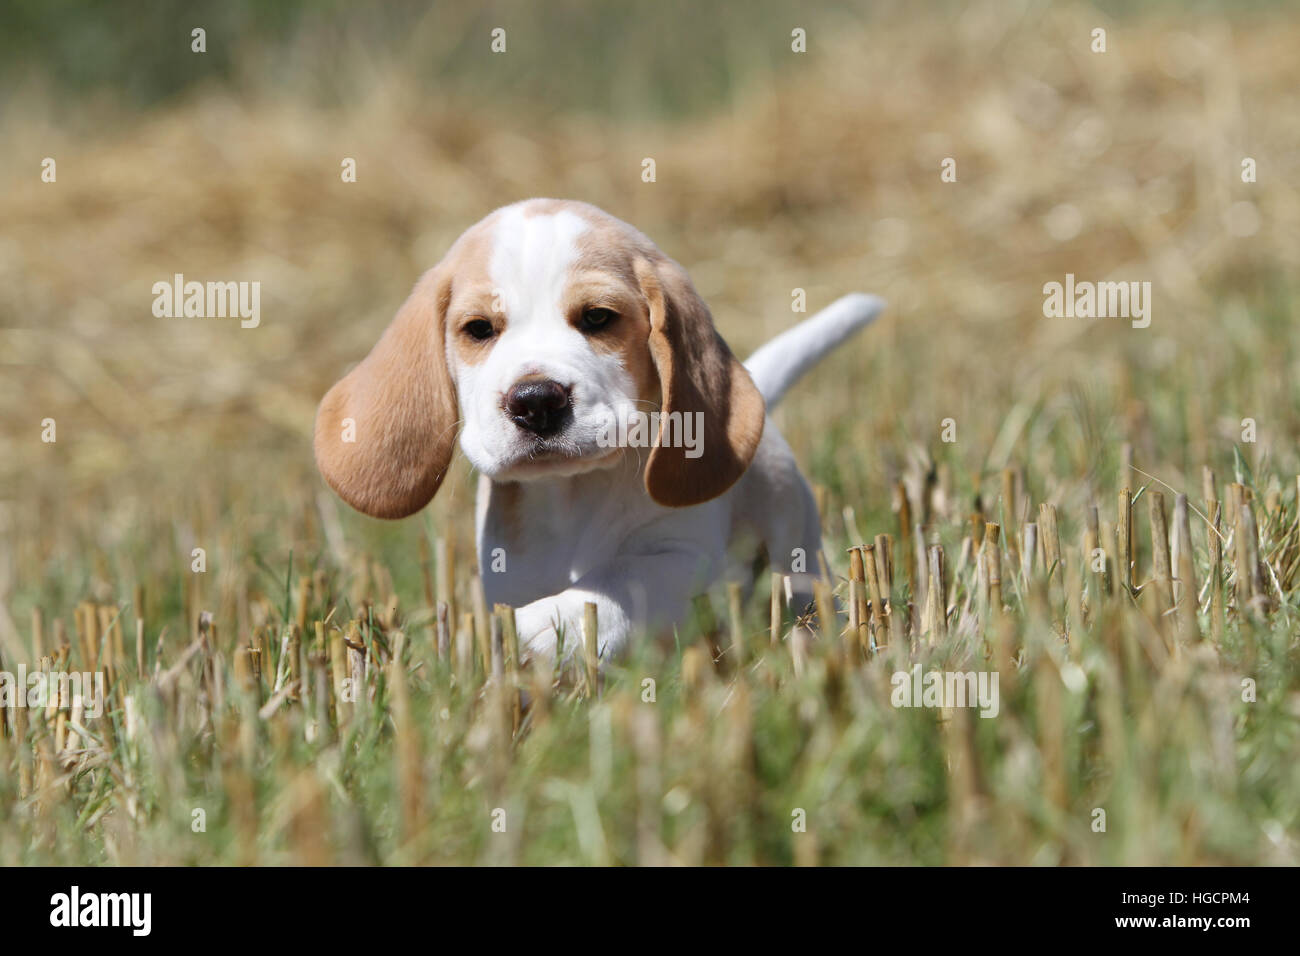 Dog Beagle puppy running In the straw Stock Photo